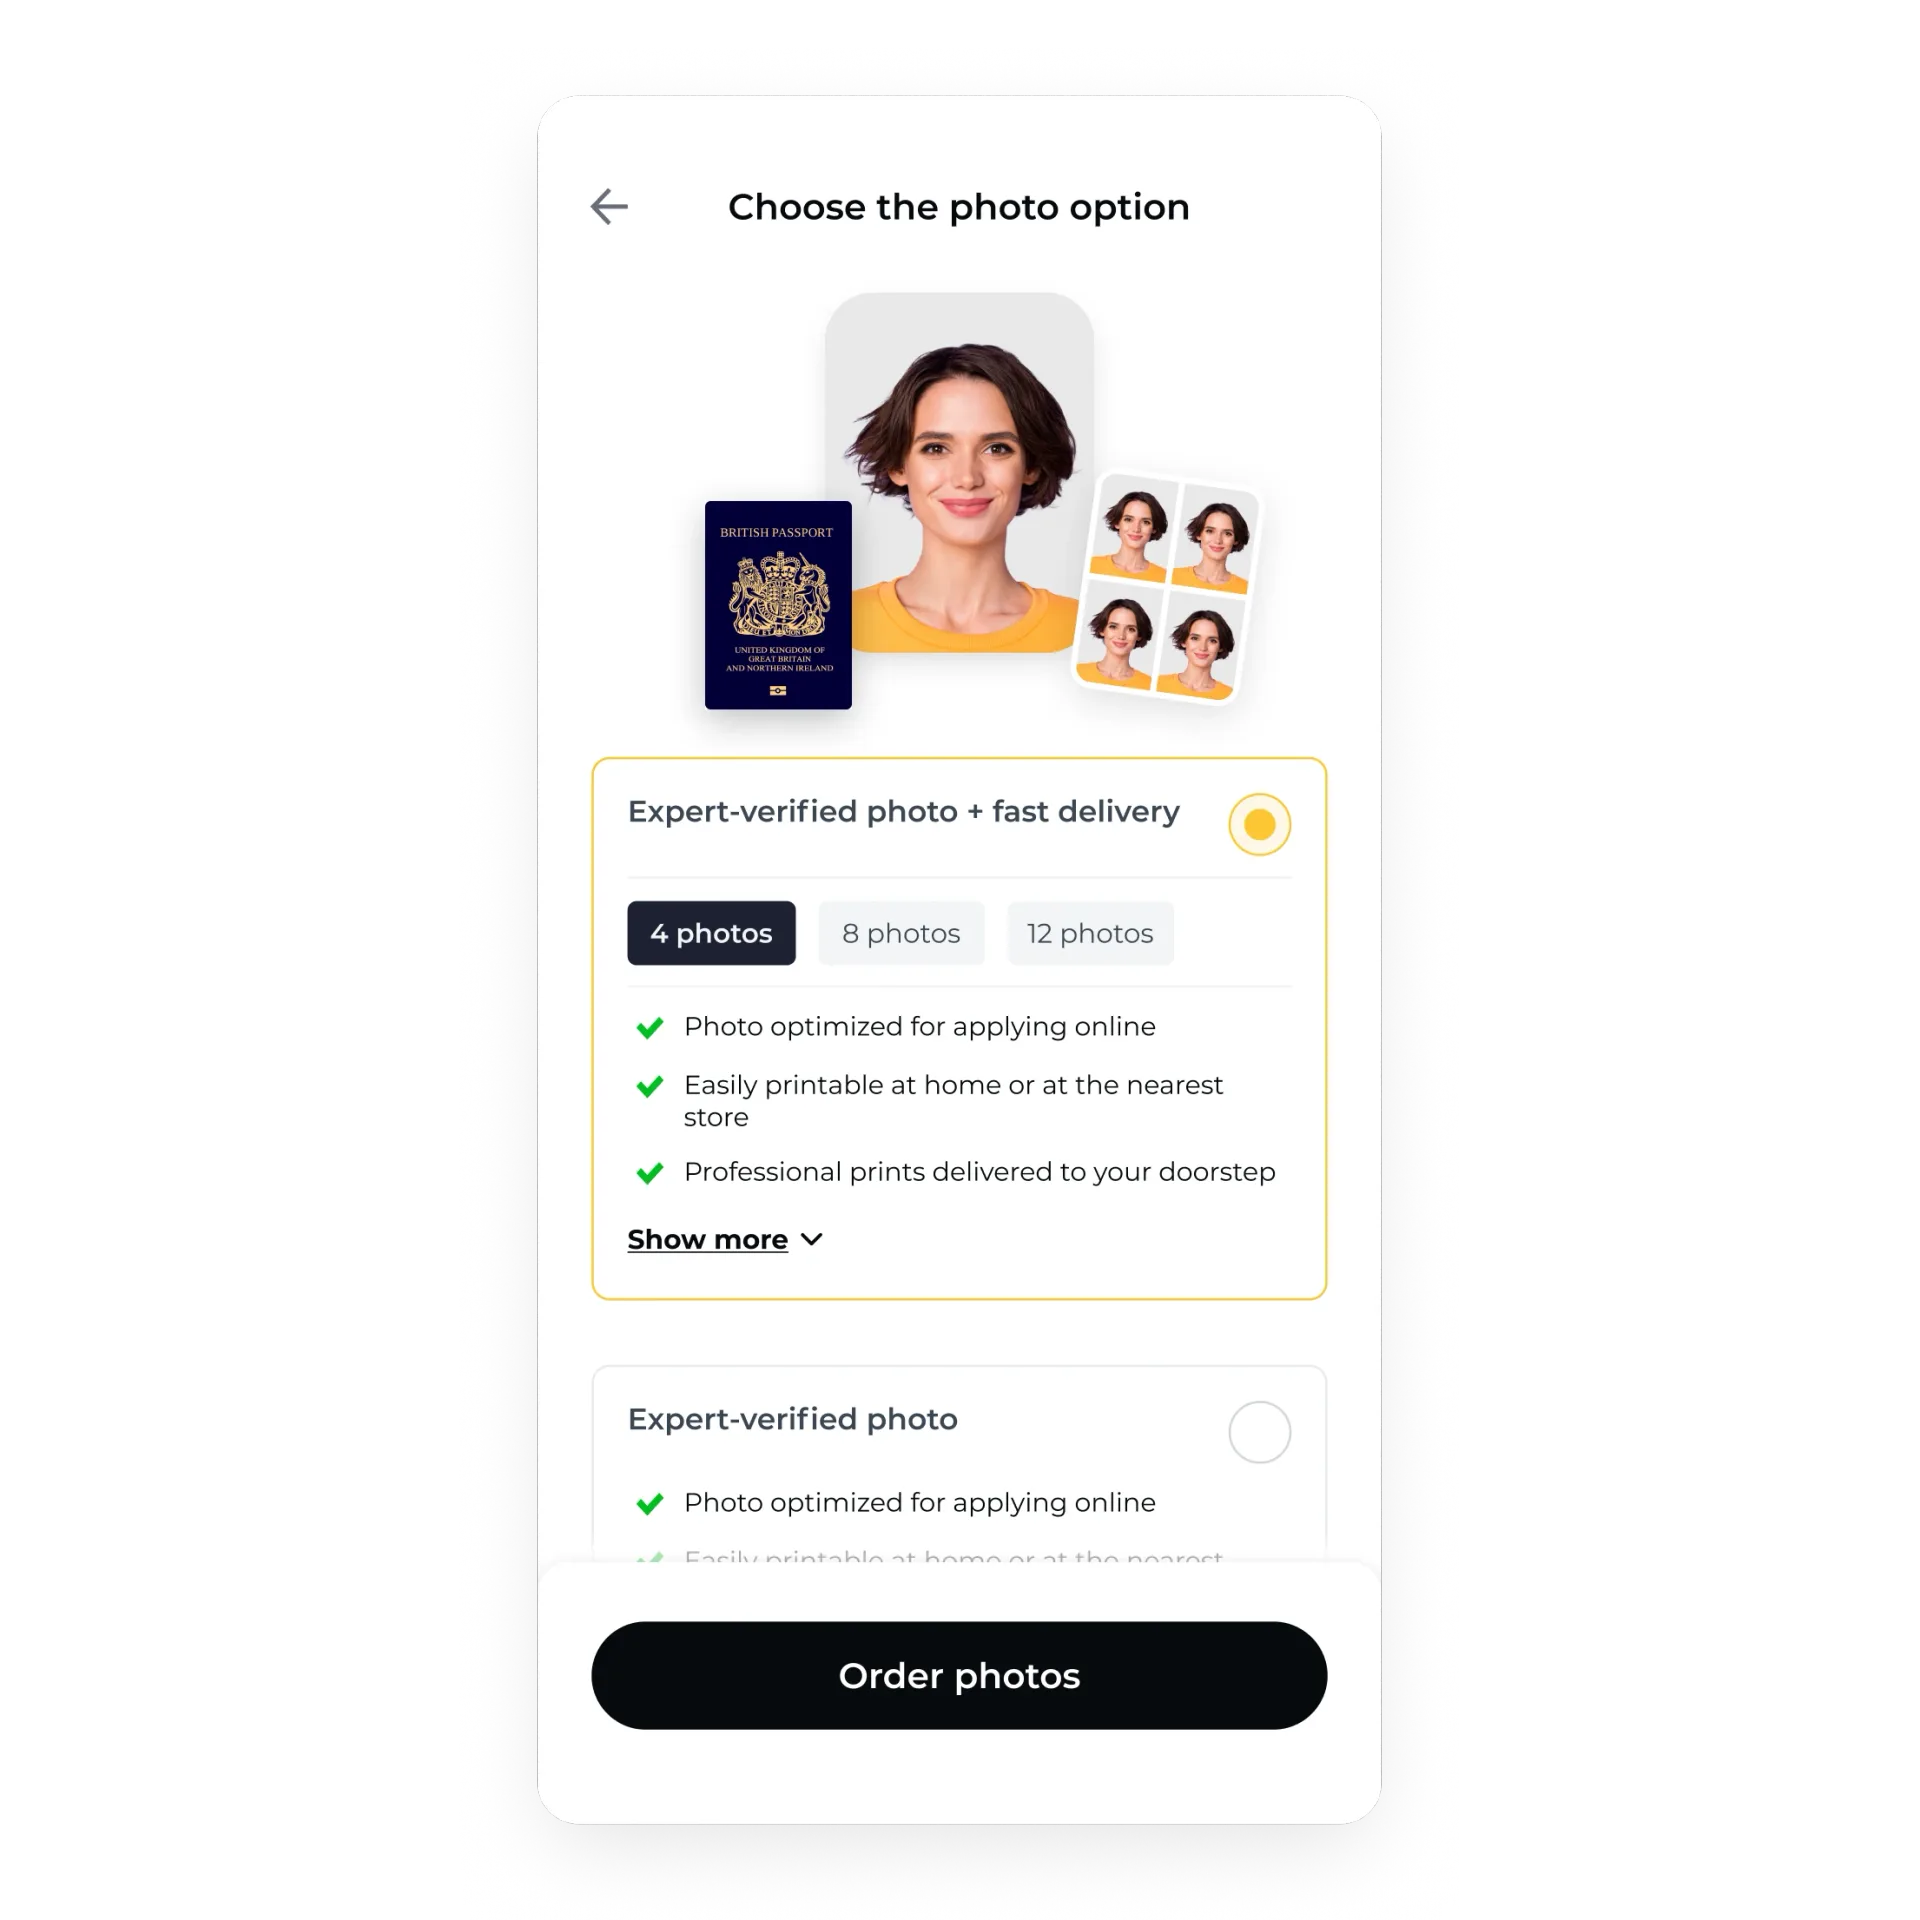 A screenshot from a mobile passport photo app showing the final steps where you can order prints or a digital image.